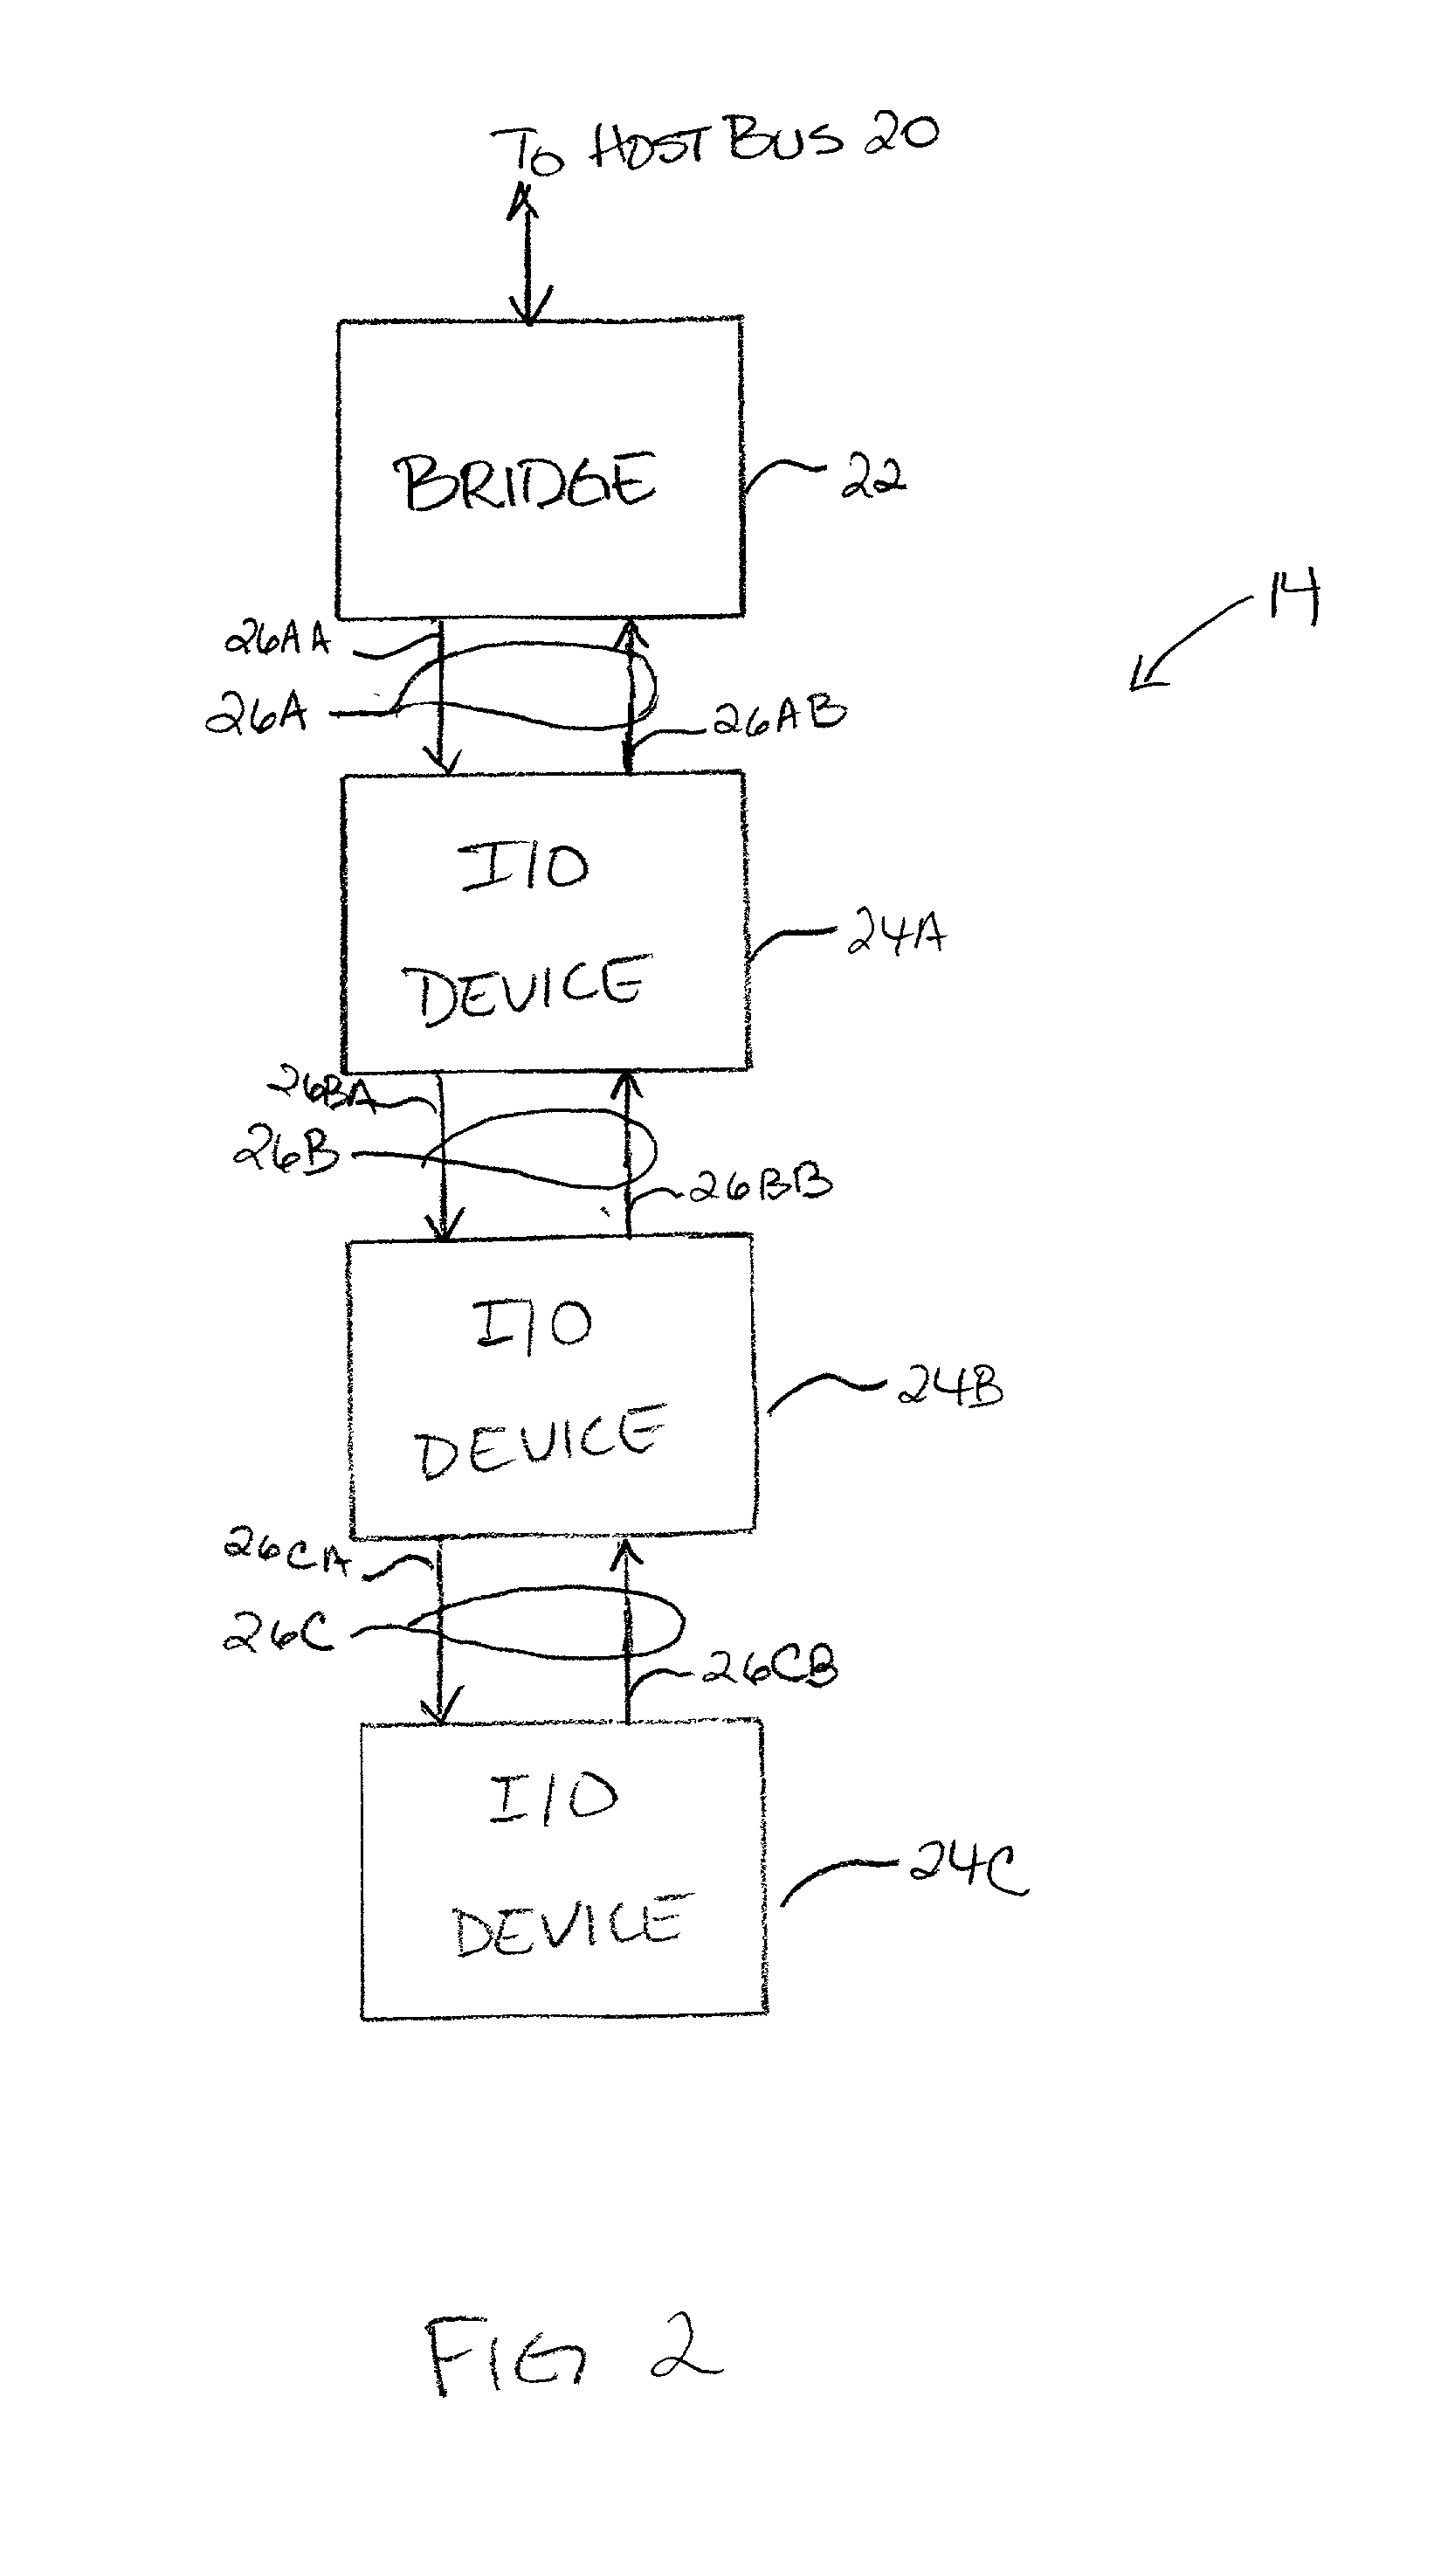 System and method of allocating bandwith to a plurality of devices interconnected by a plurality of point-to-point communication links